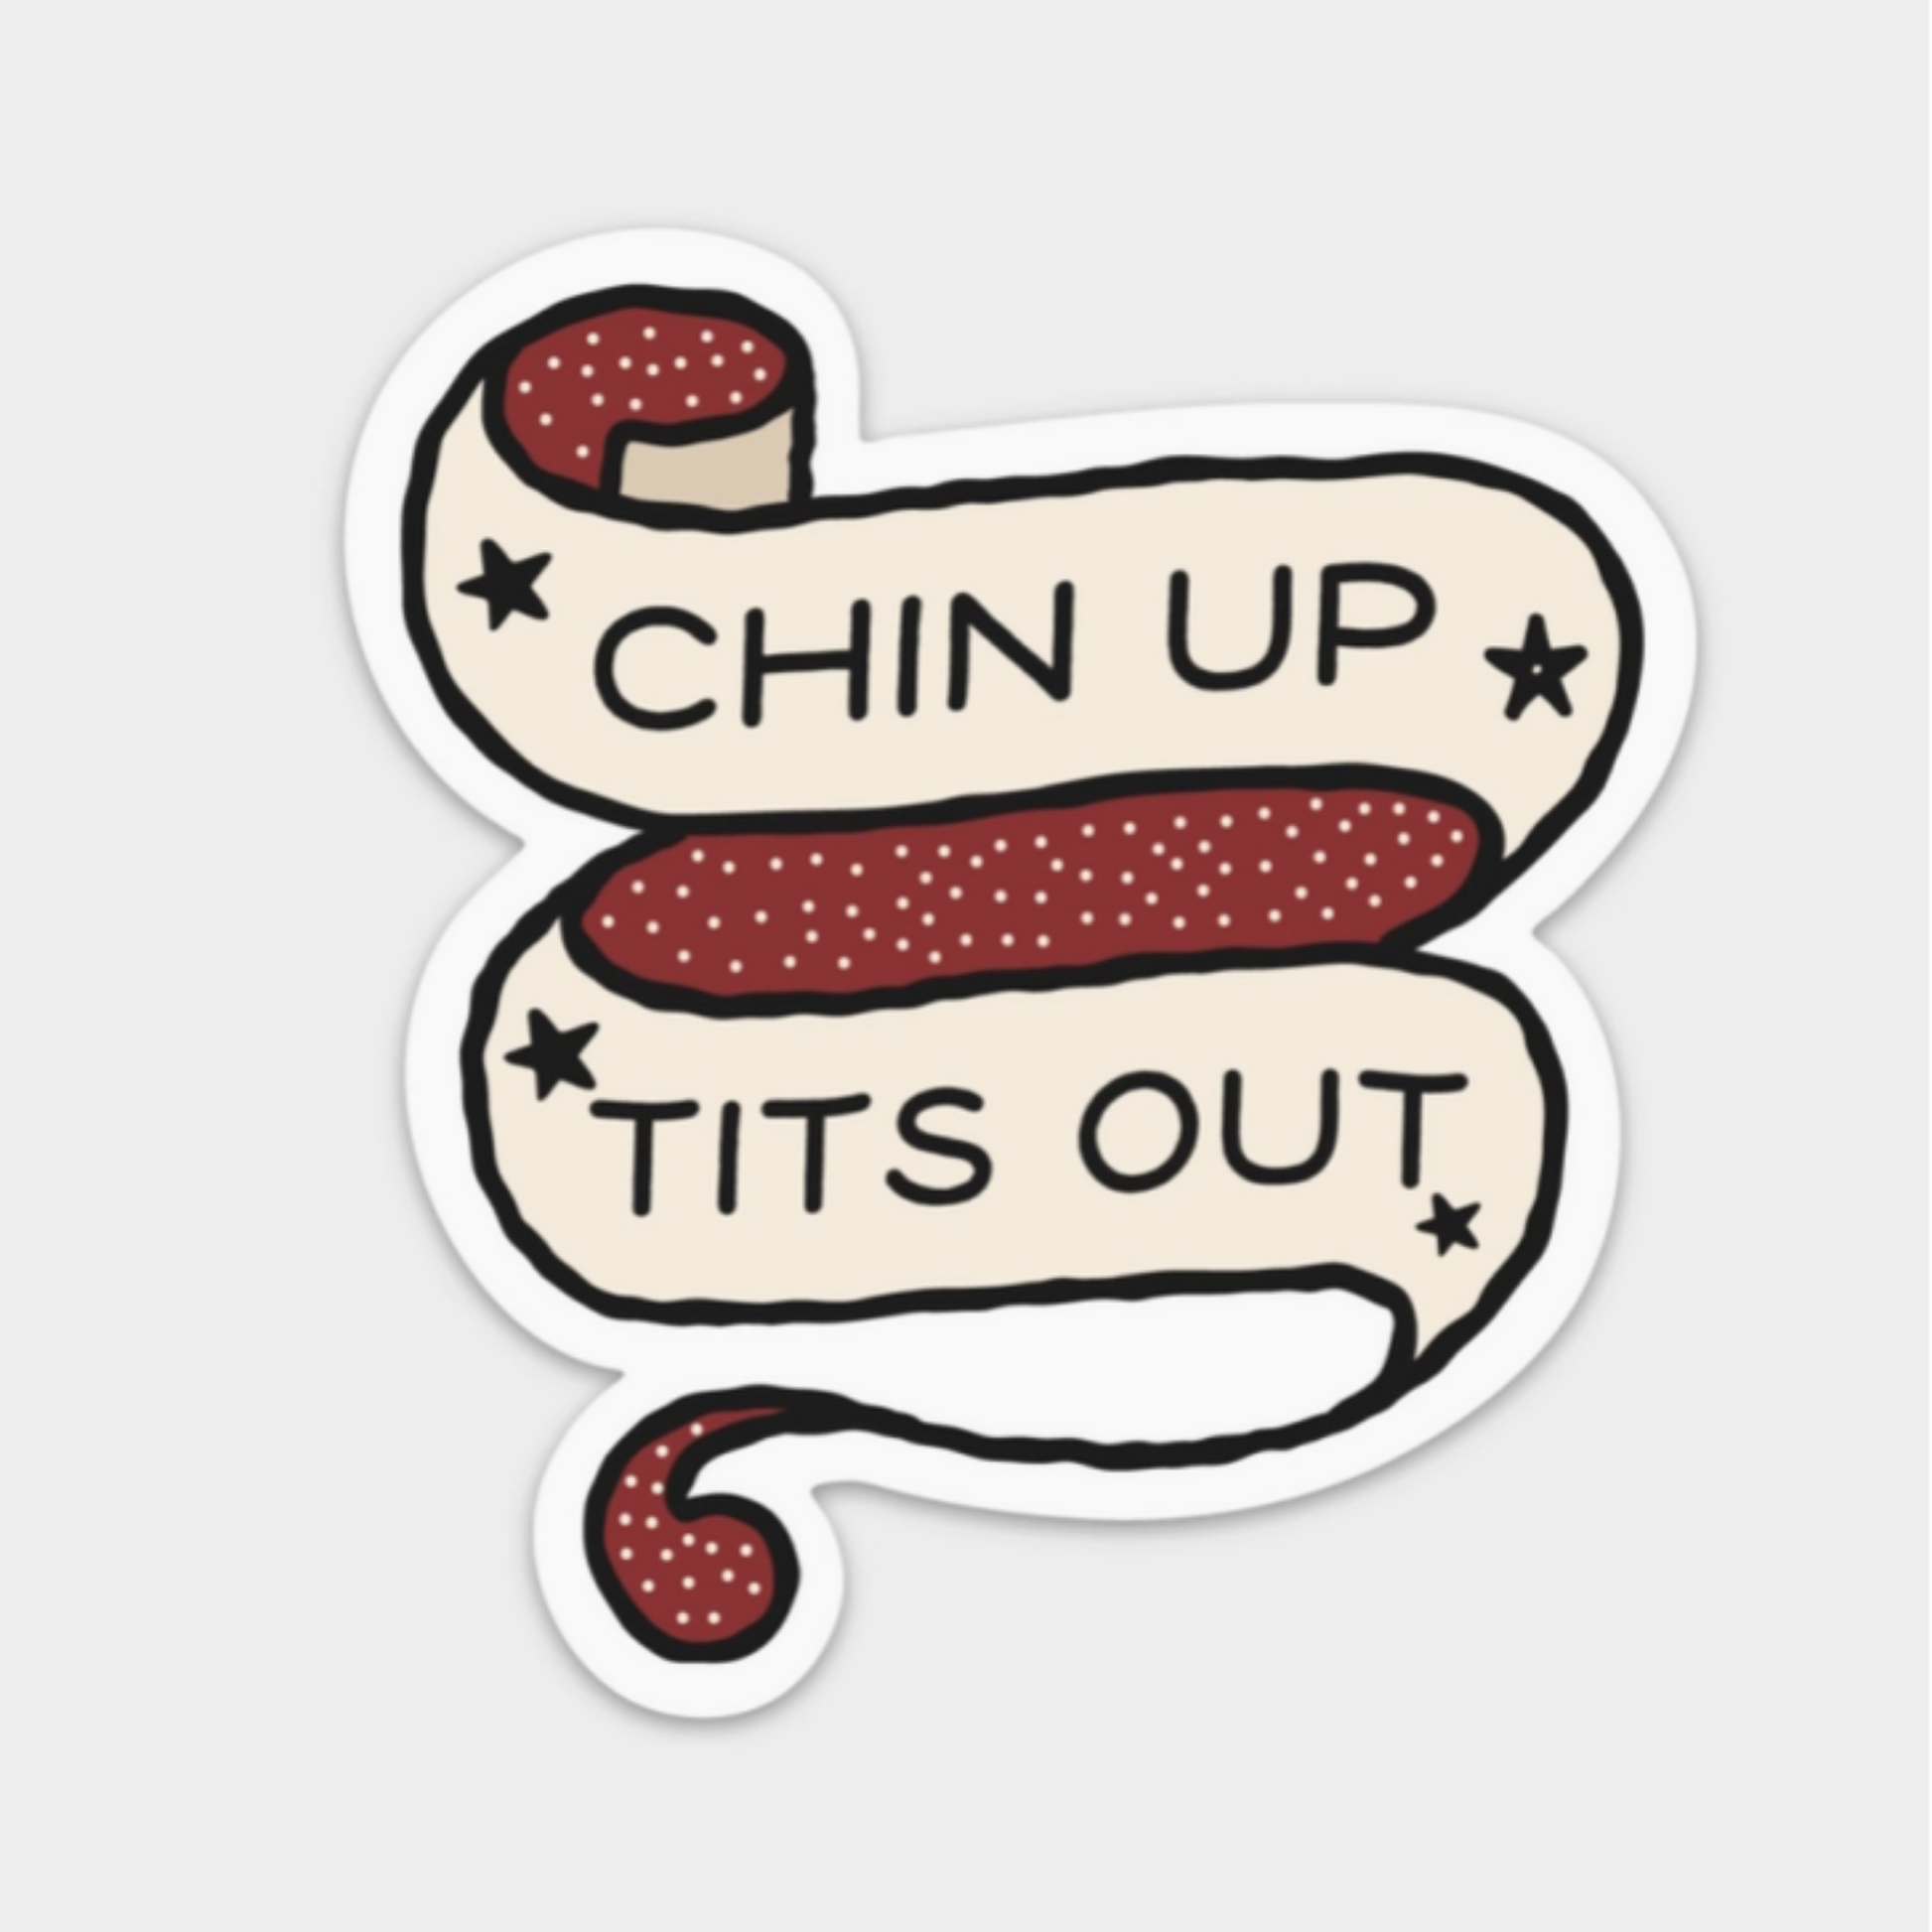 Chin up, tits out sticker